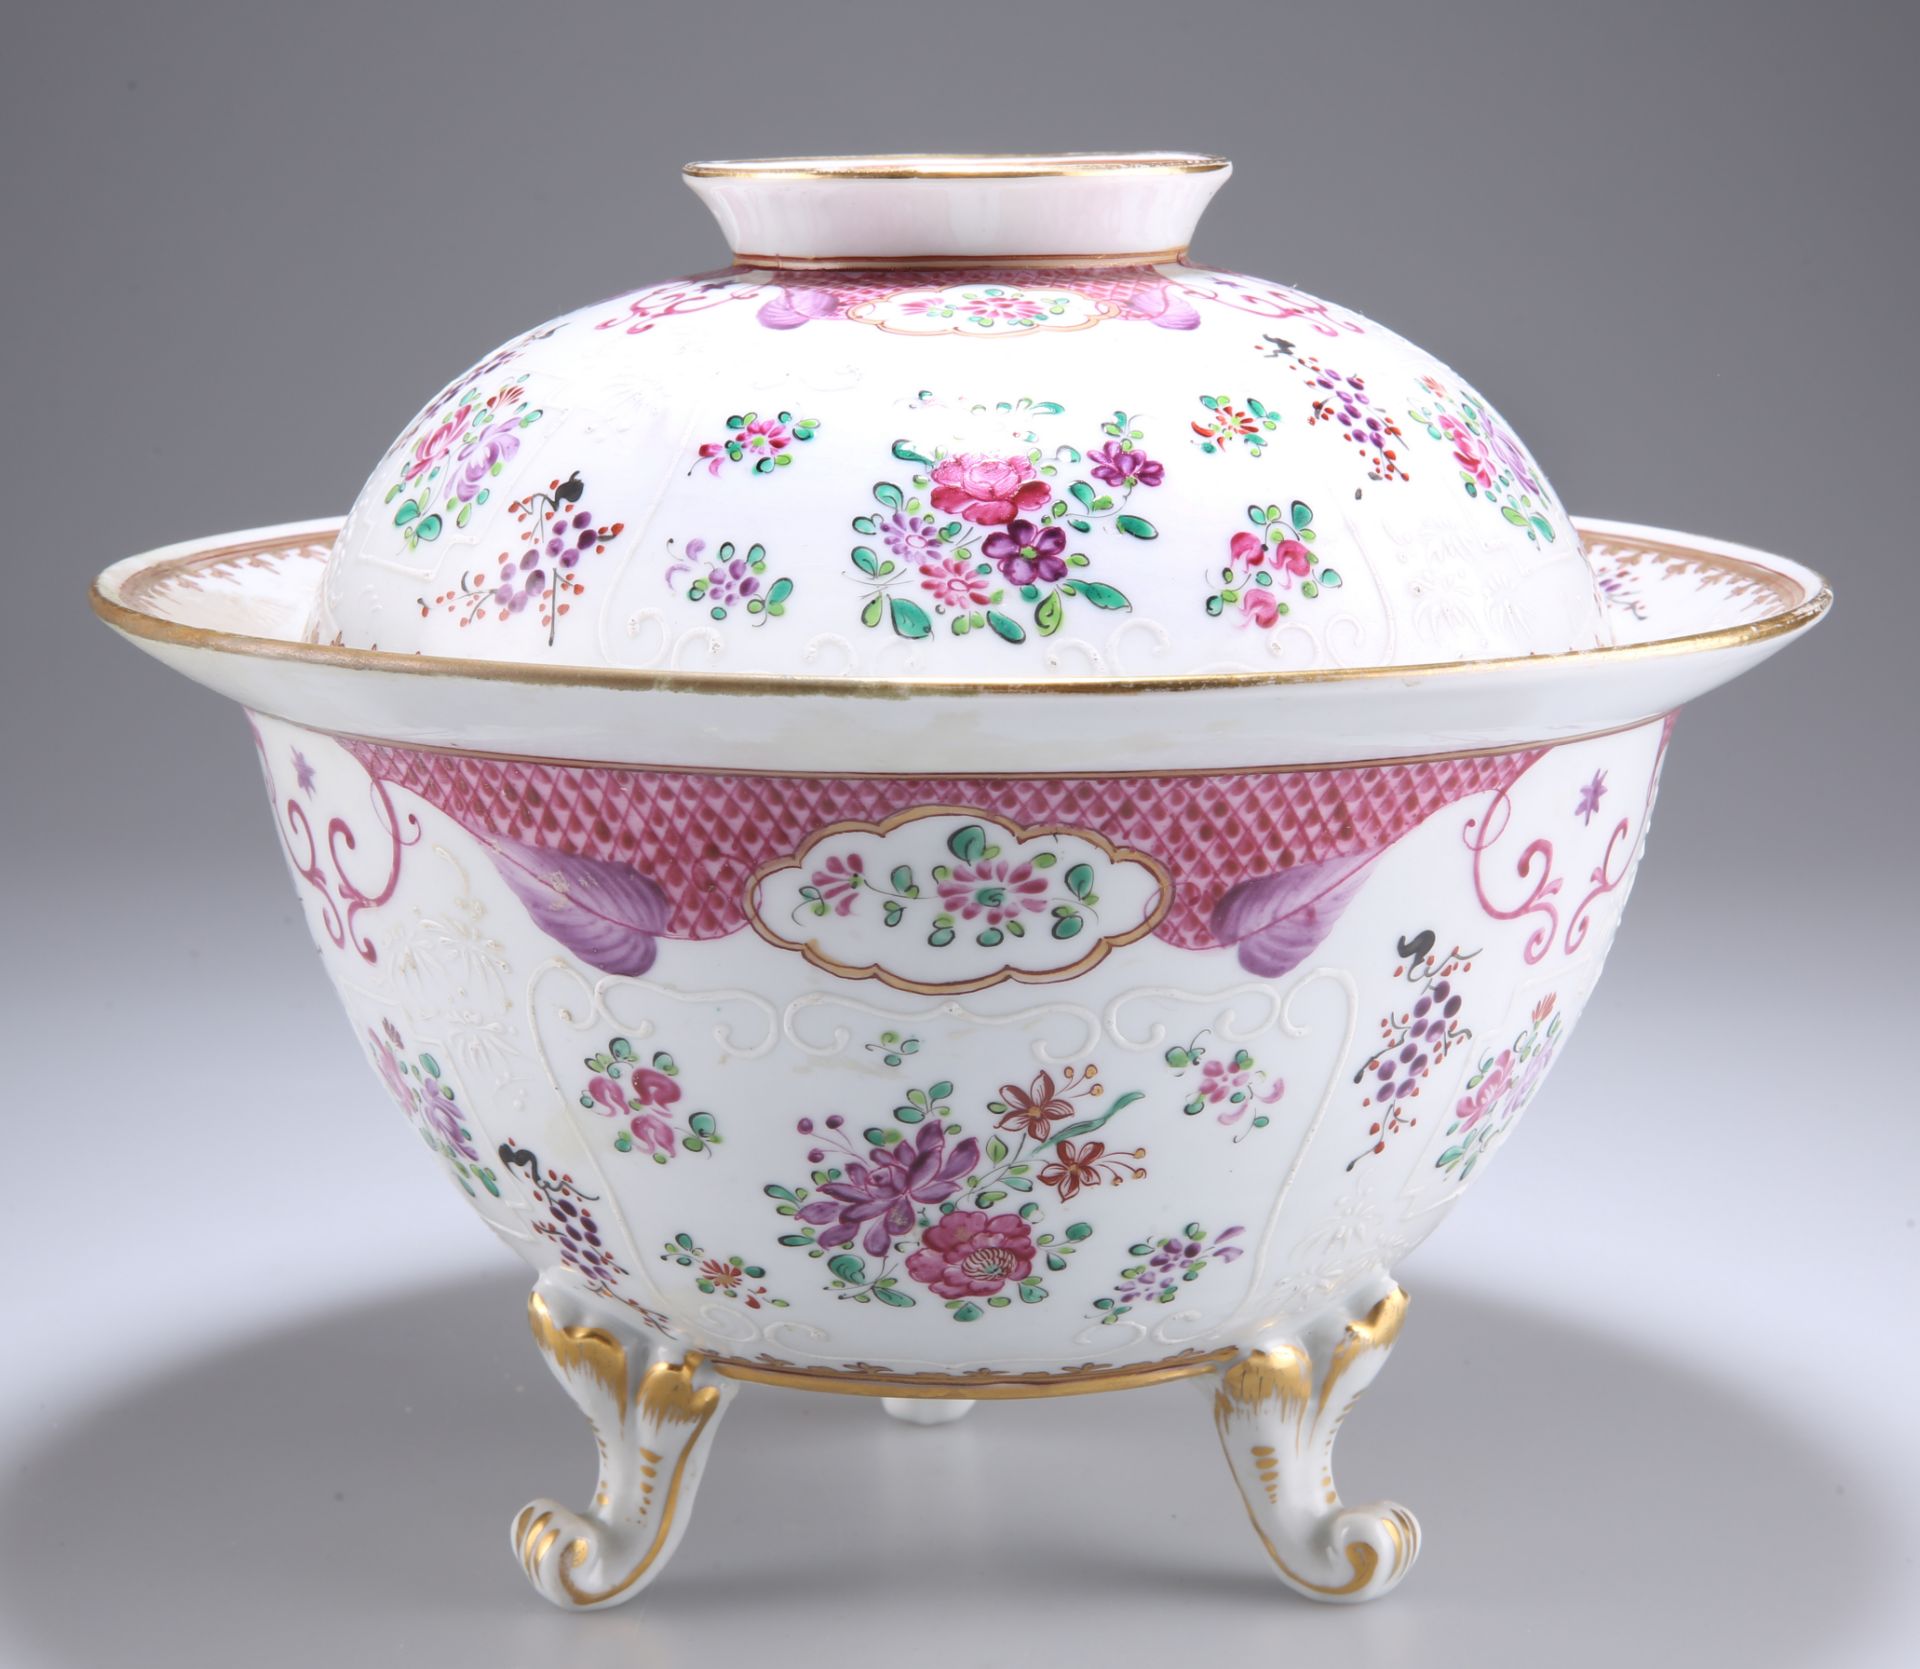 A SAMSON PORCELAIN BOWL AND COVER IN CHINESE EXPORT STYLE - Image 2 of 3